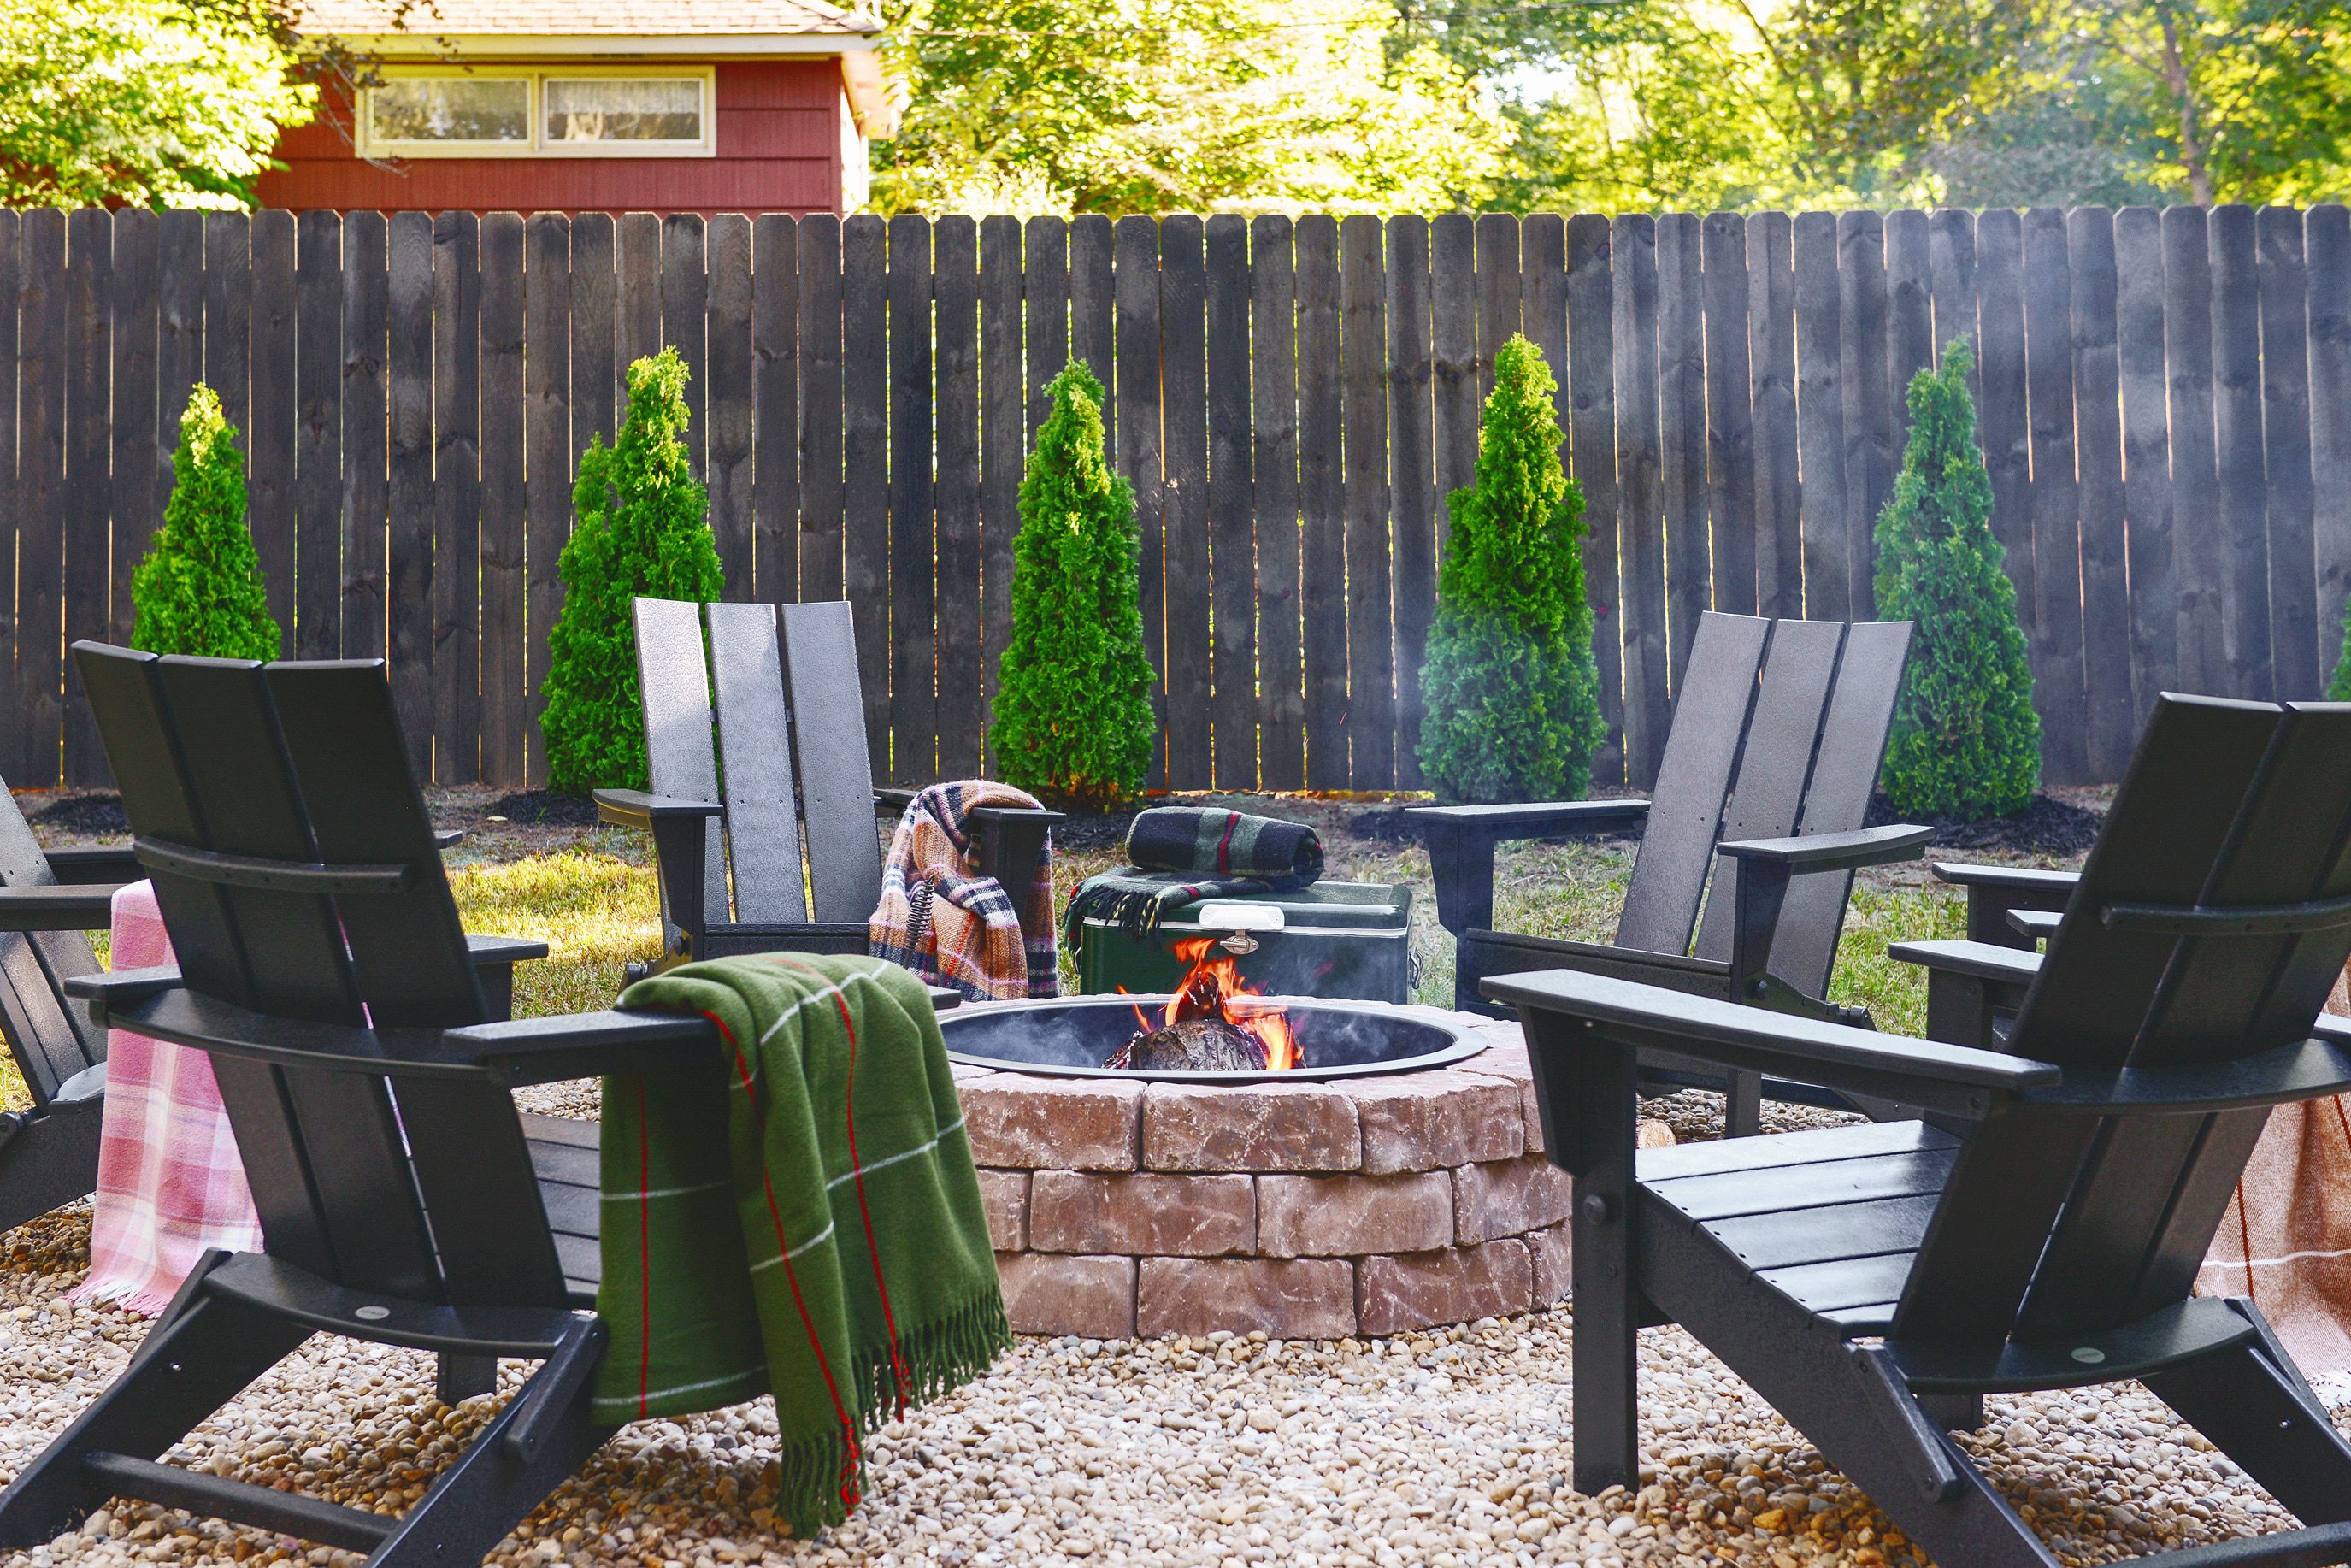 How to make a backyard fire pit in a weekend // via Yellow Brick Home